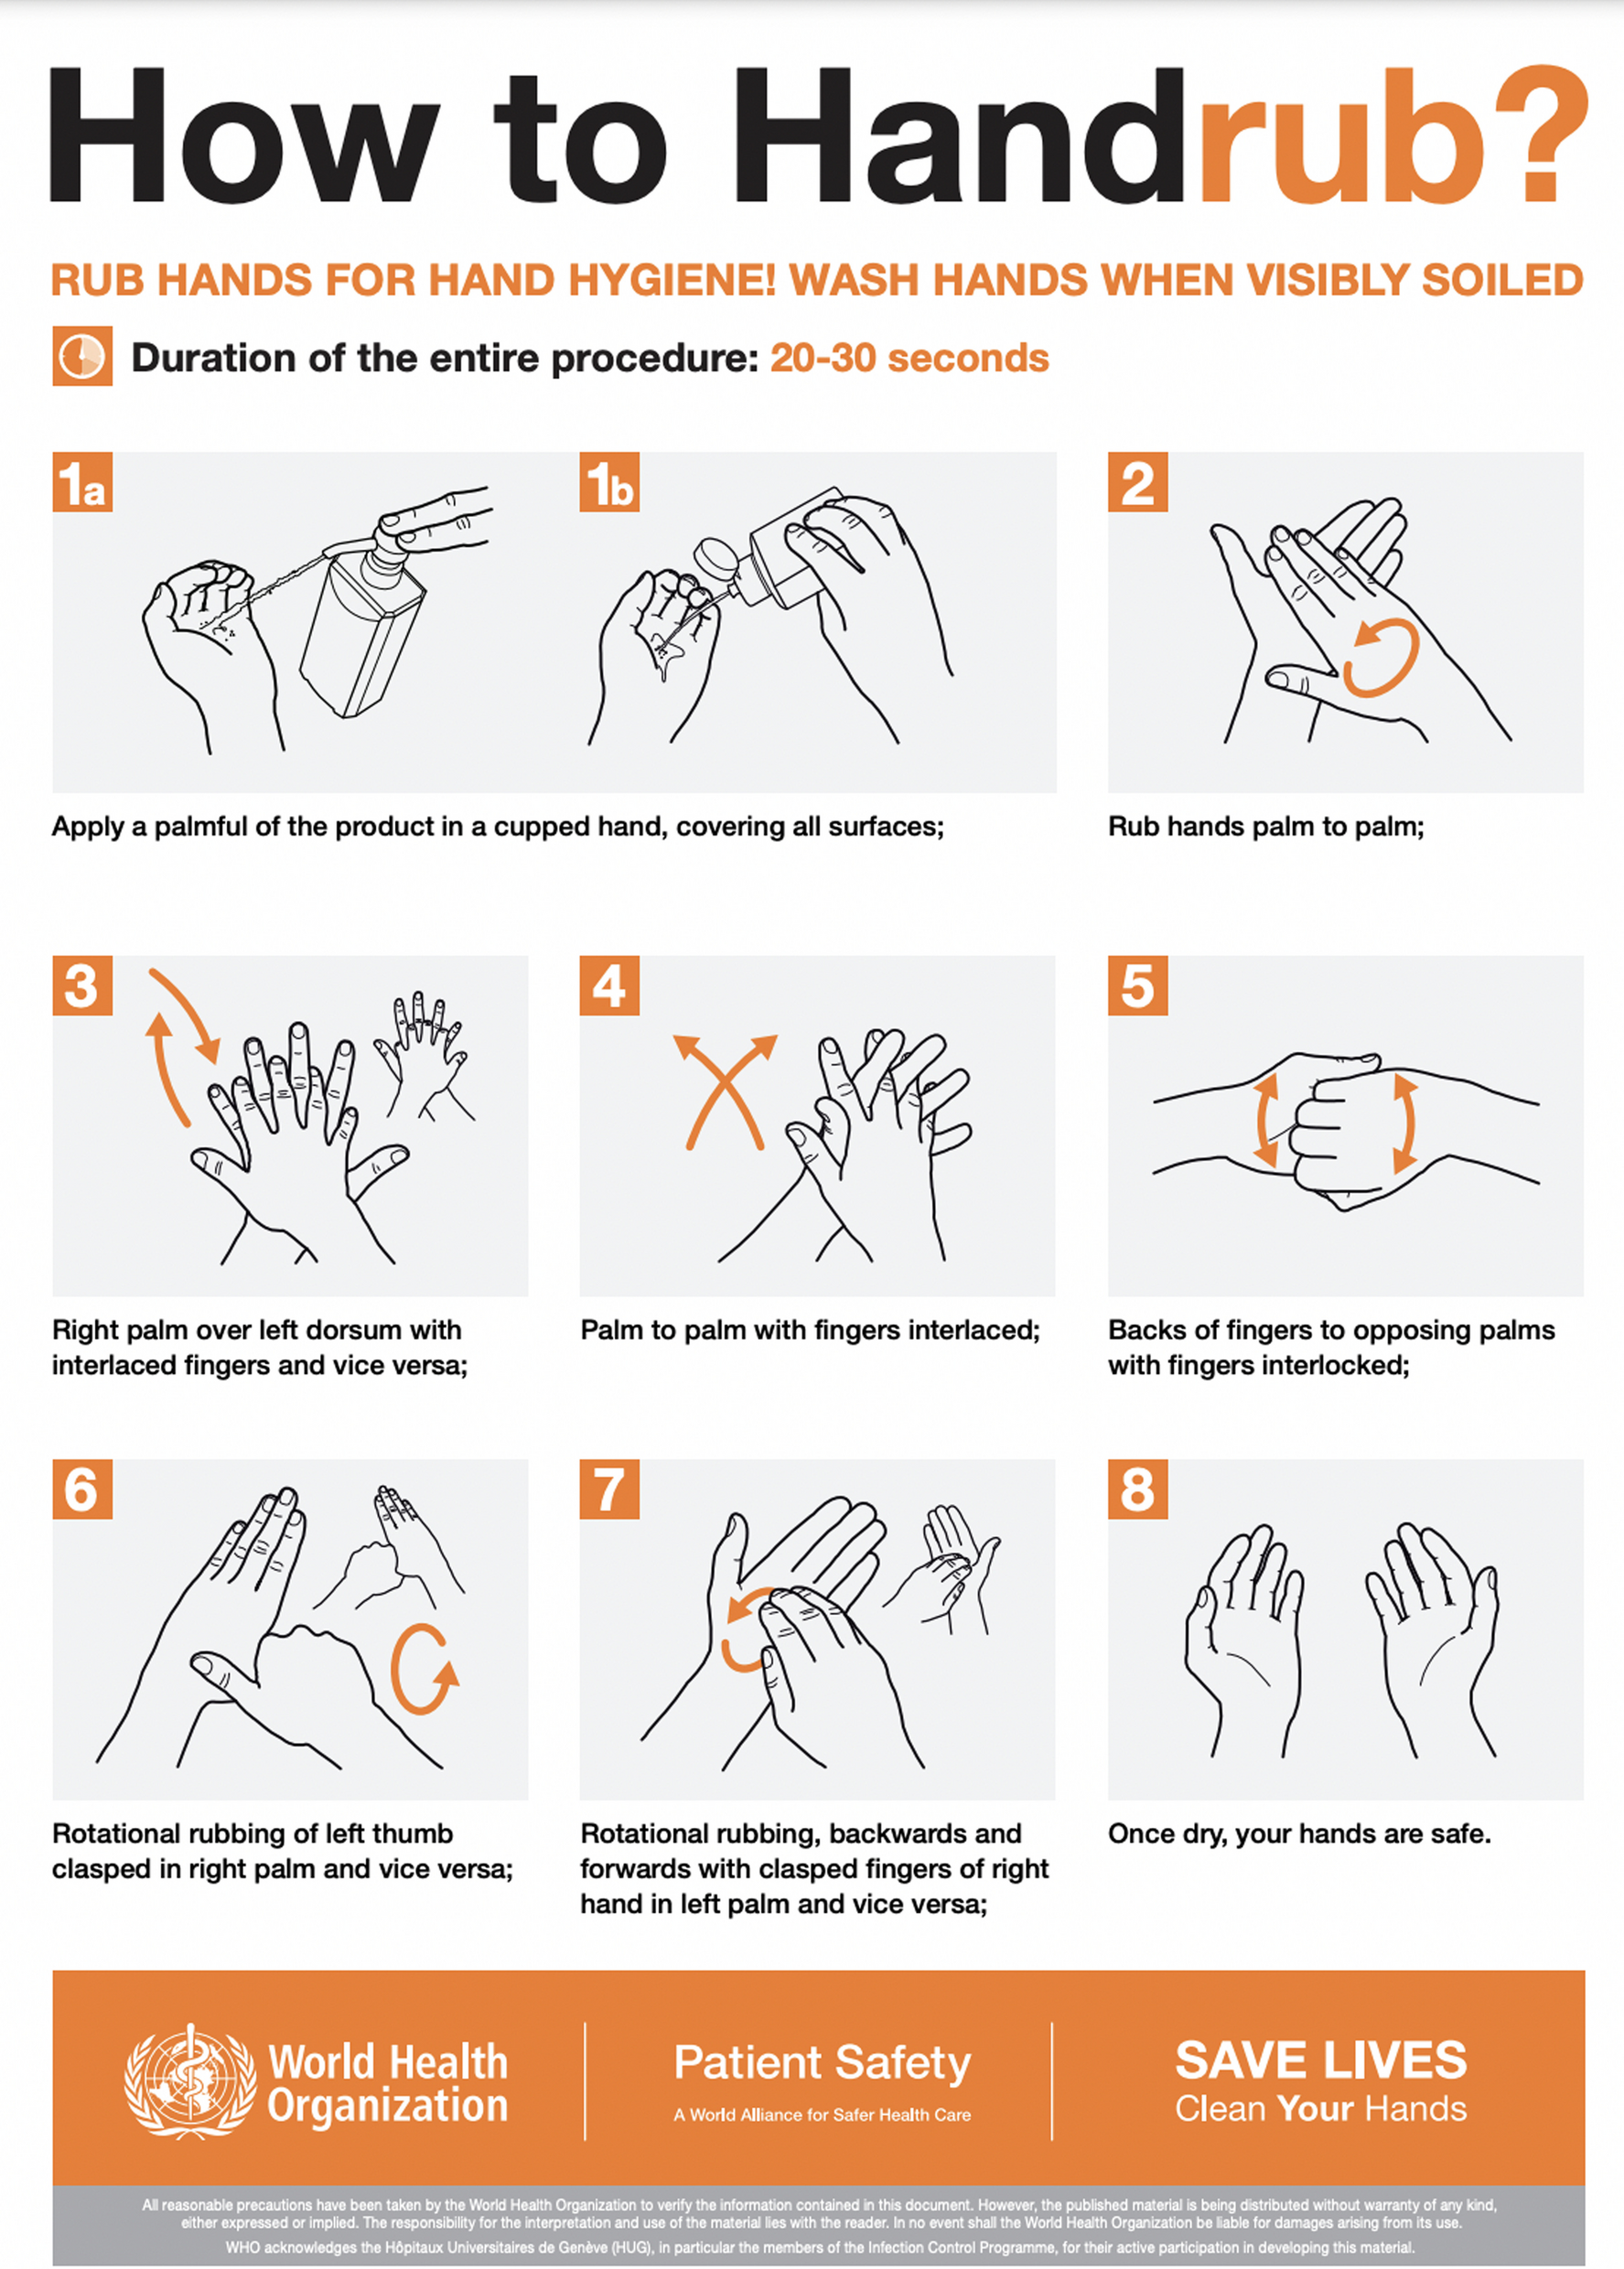 Updates and future directions regarding hand hygiene in the healthcare setting: insights from the 3rd ICPIC alcohol-based handrub (ABHR) task force